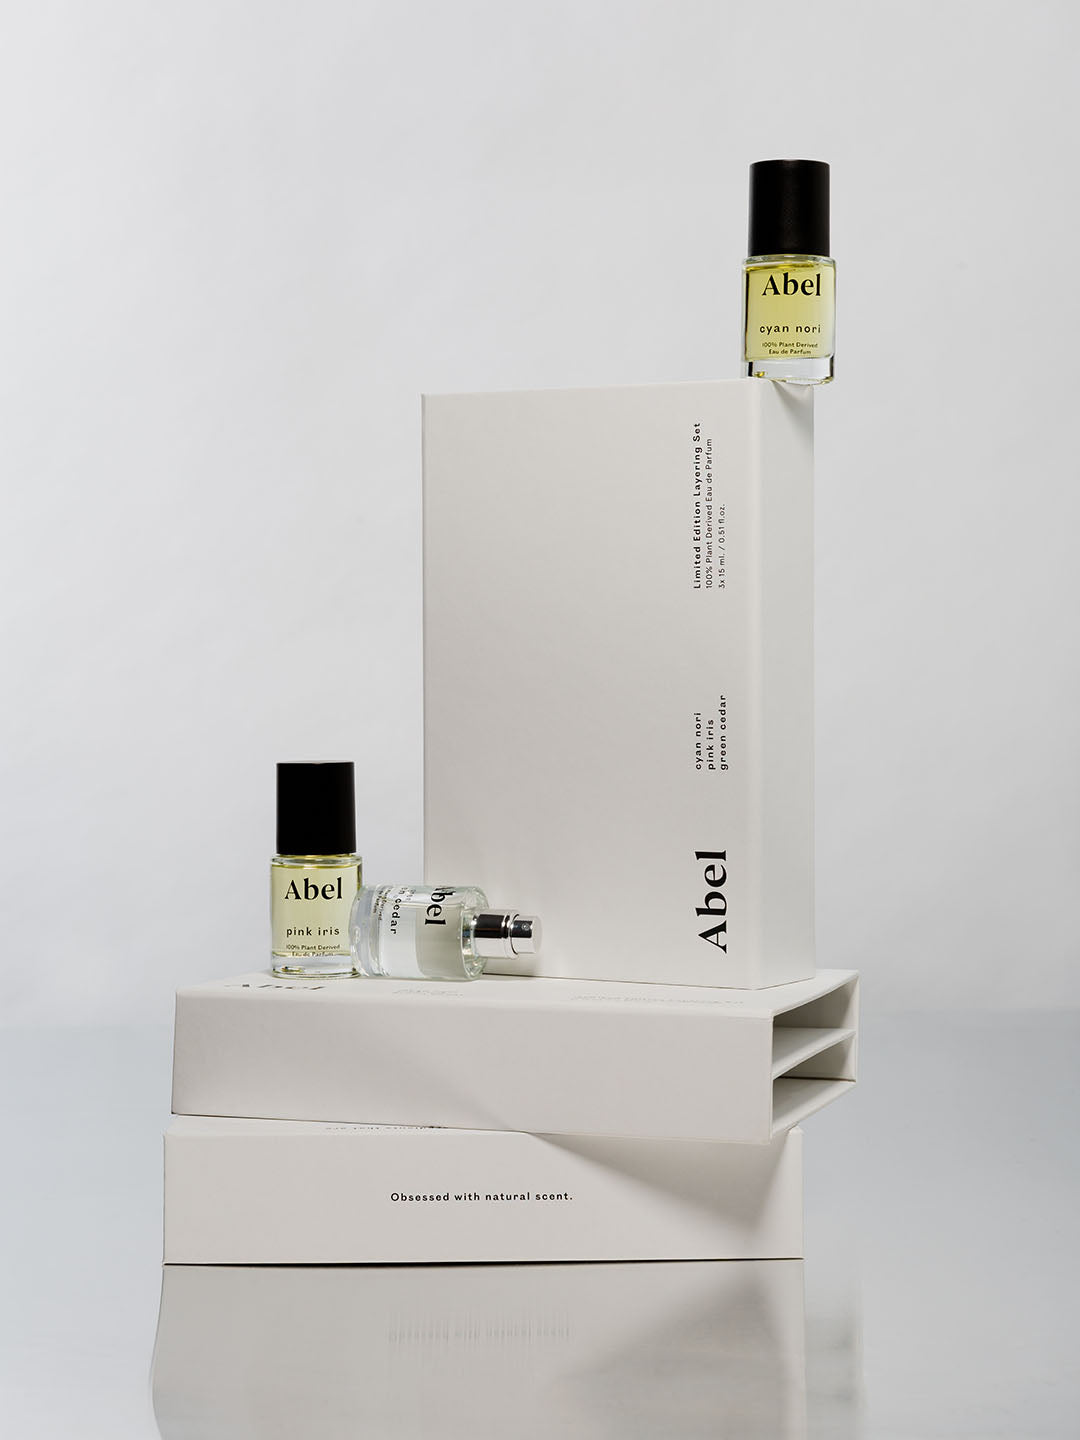 Two bottles of Abel Layering Set – Cyan Nori ⋄ Green Cedar ⋄ Pink Iris natural eau de parfum displayed on a minimalist white background, with a large and a small bottle in front of a rectangular pedestal, forming an elegant layering set